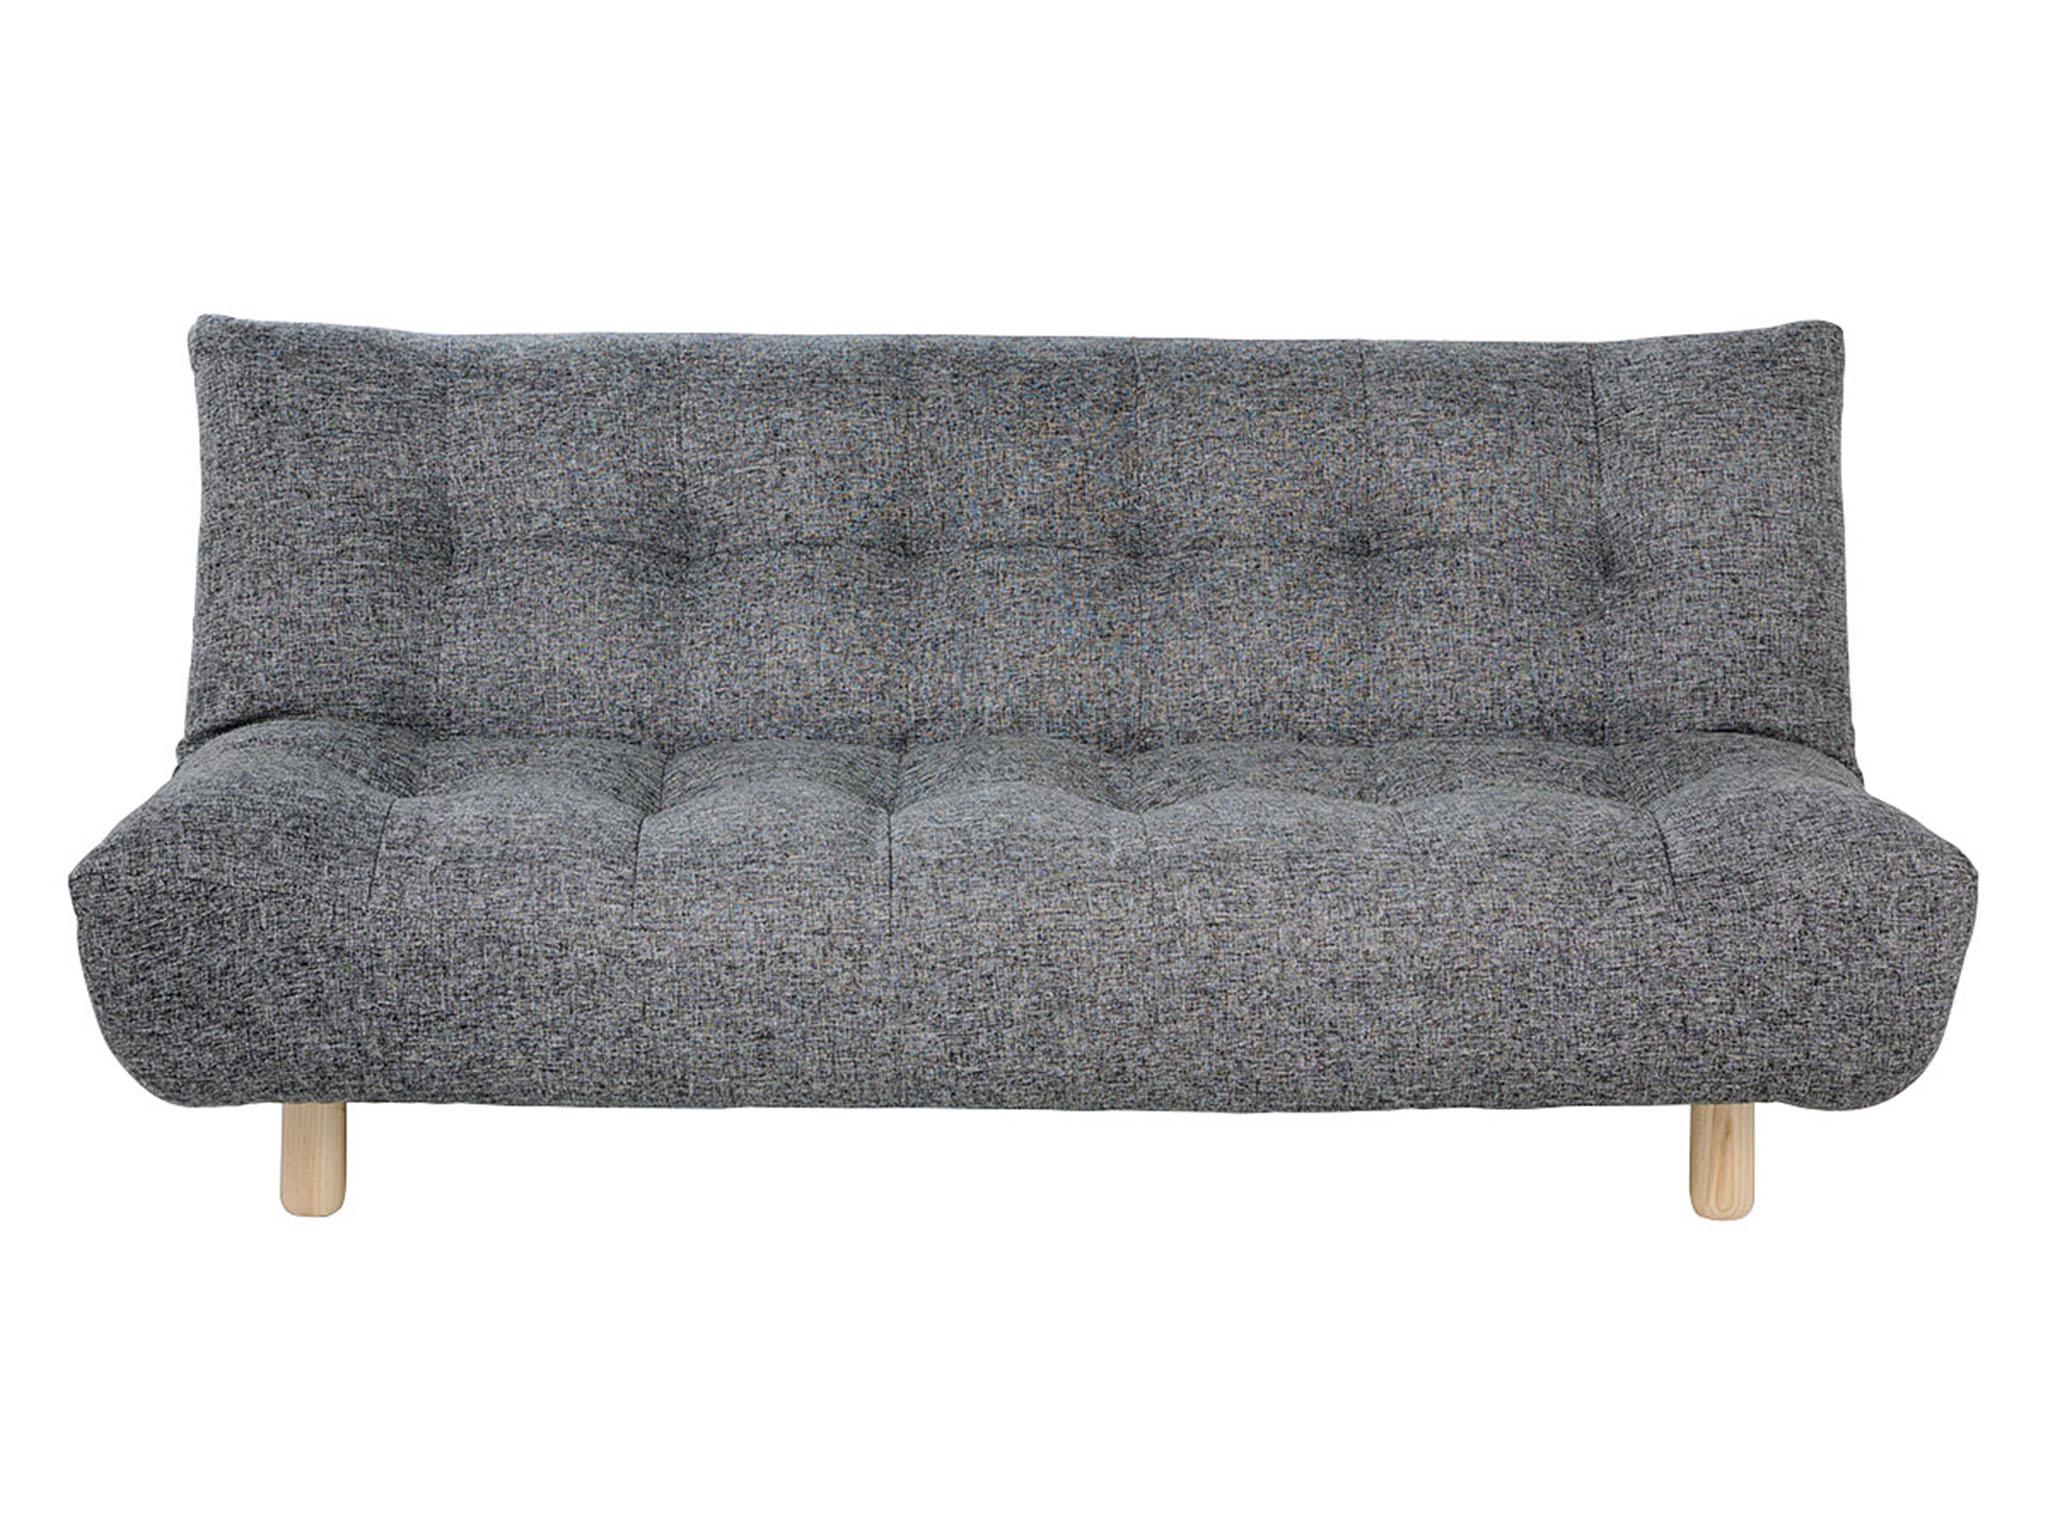 Self assembly sofa bed